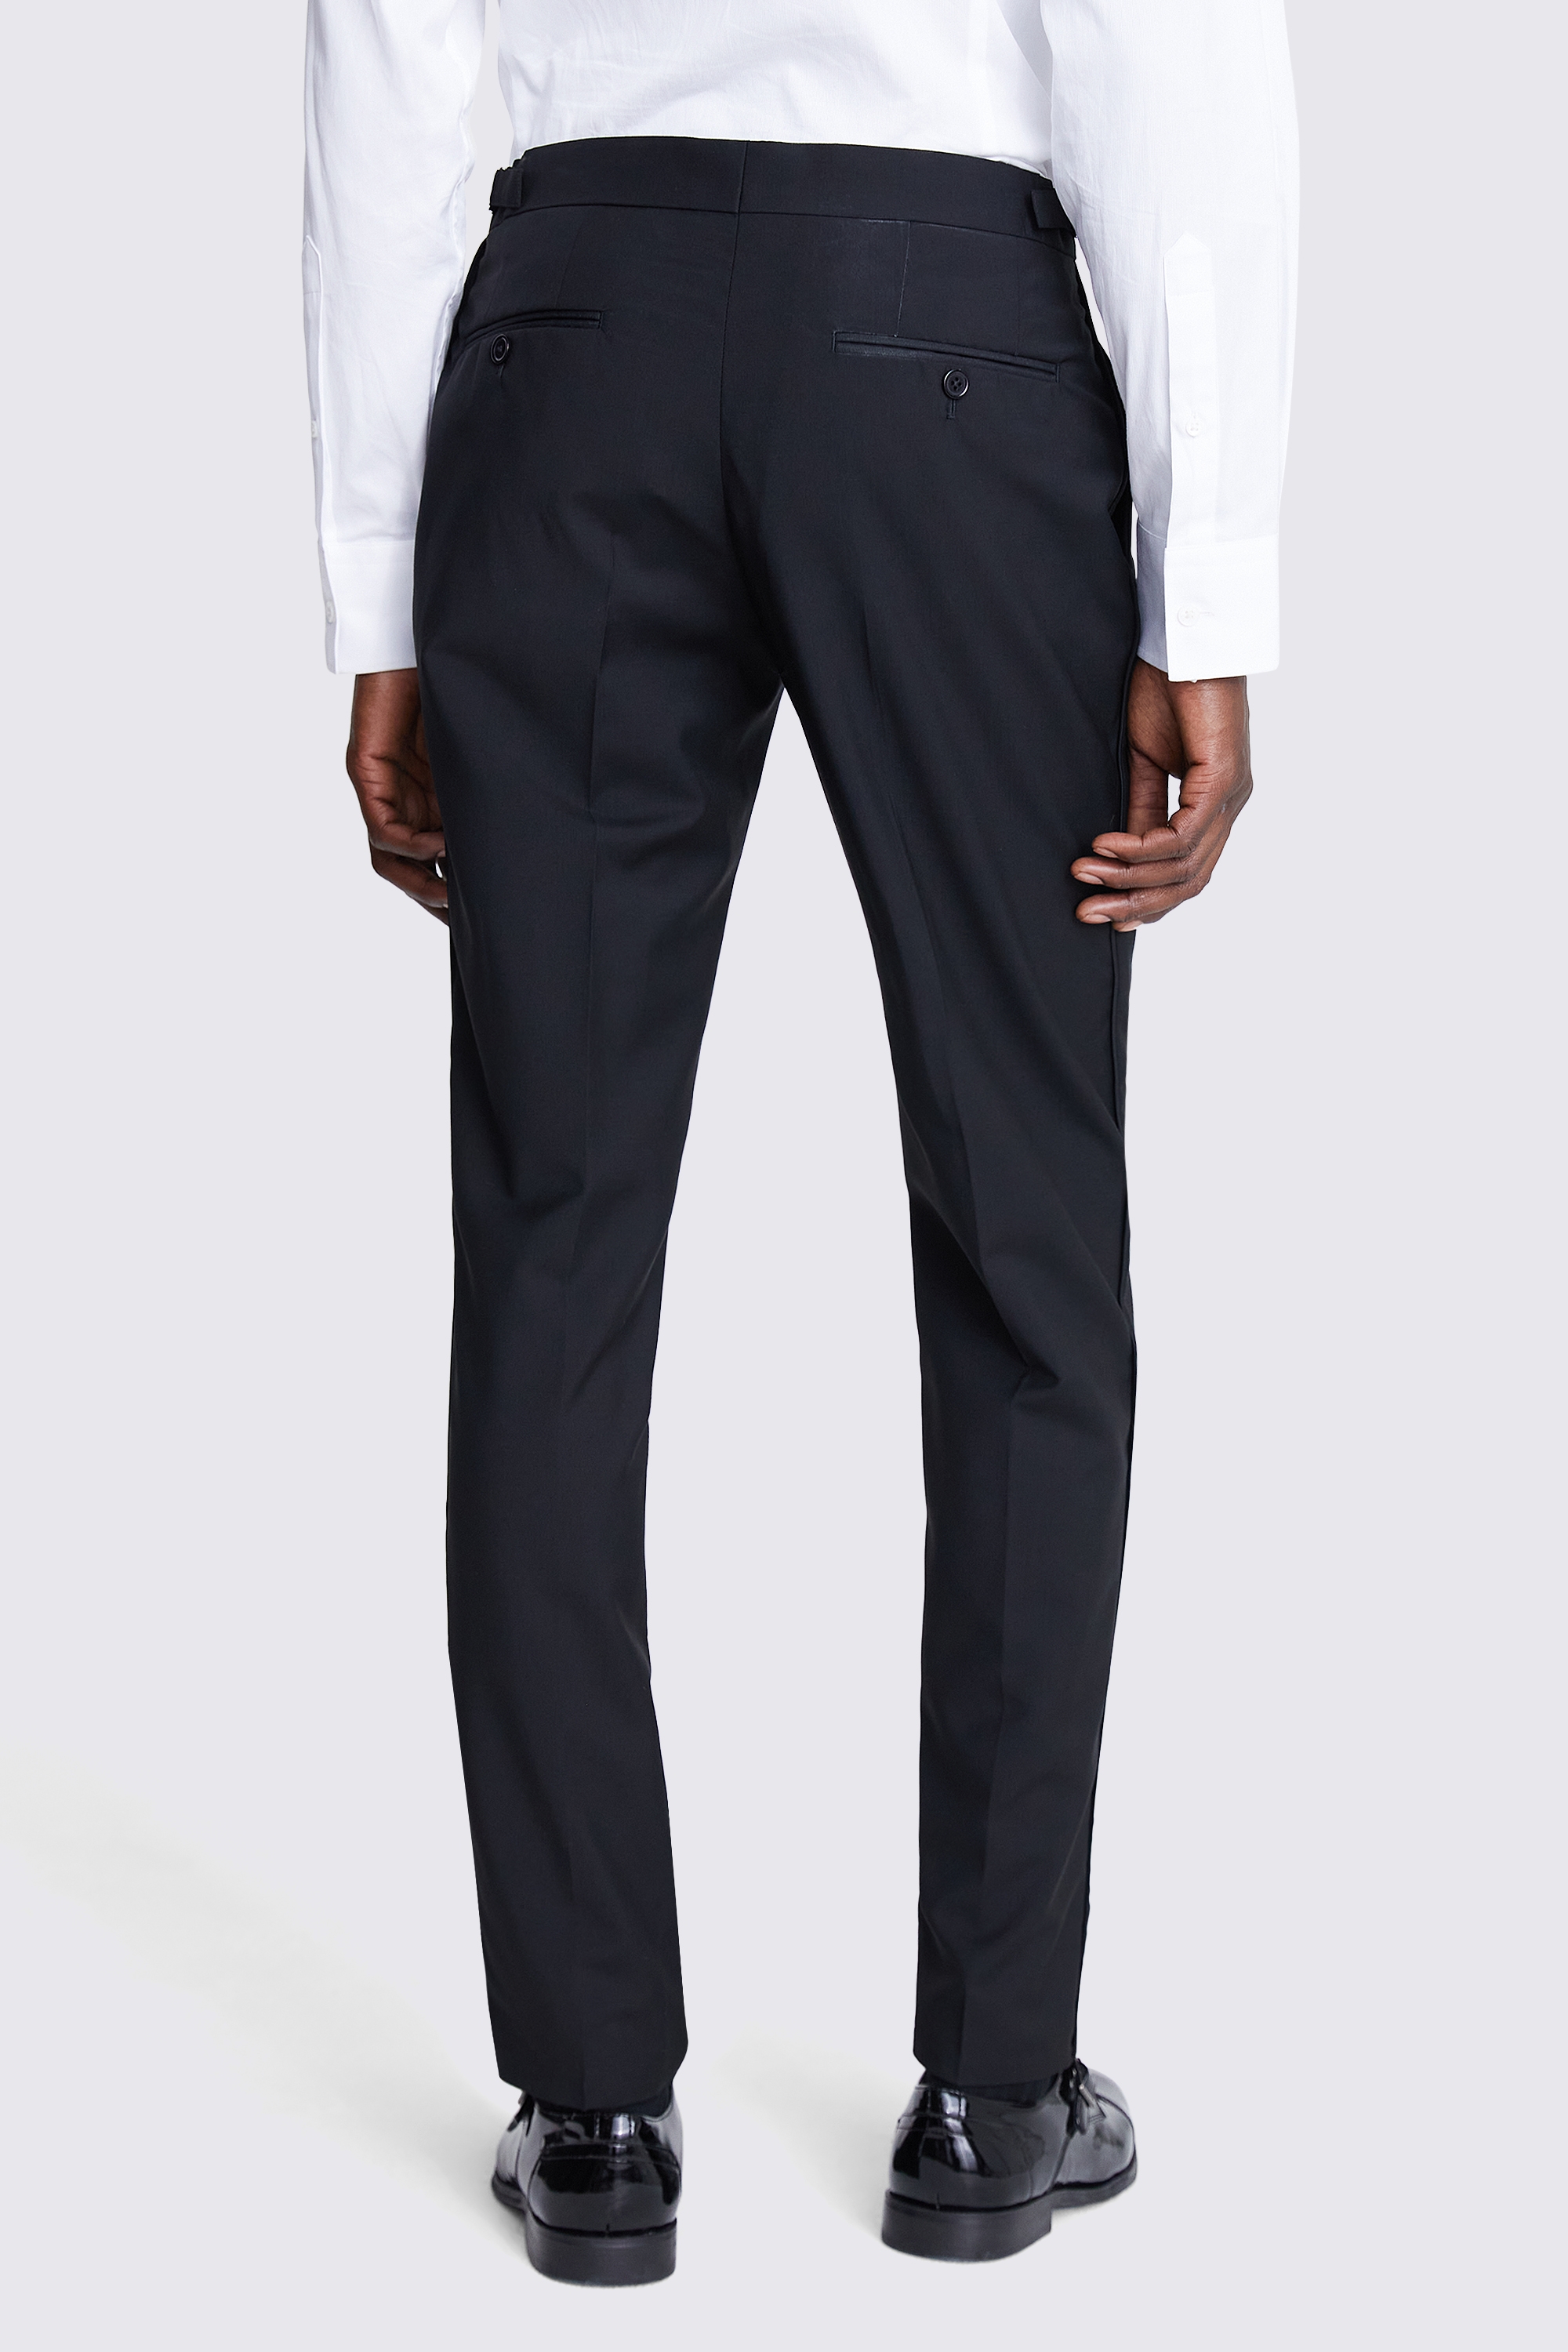 Italian Tailored Fit Black Trousers | Buy Online at Moss